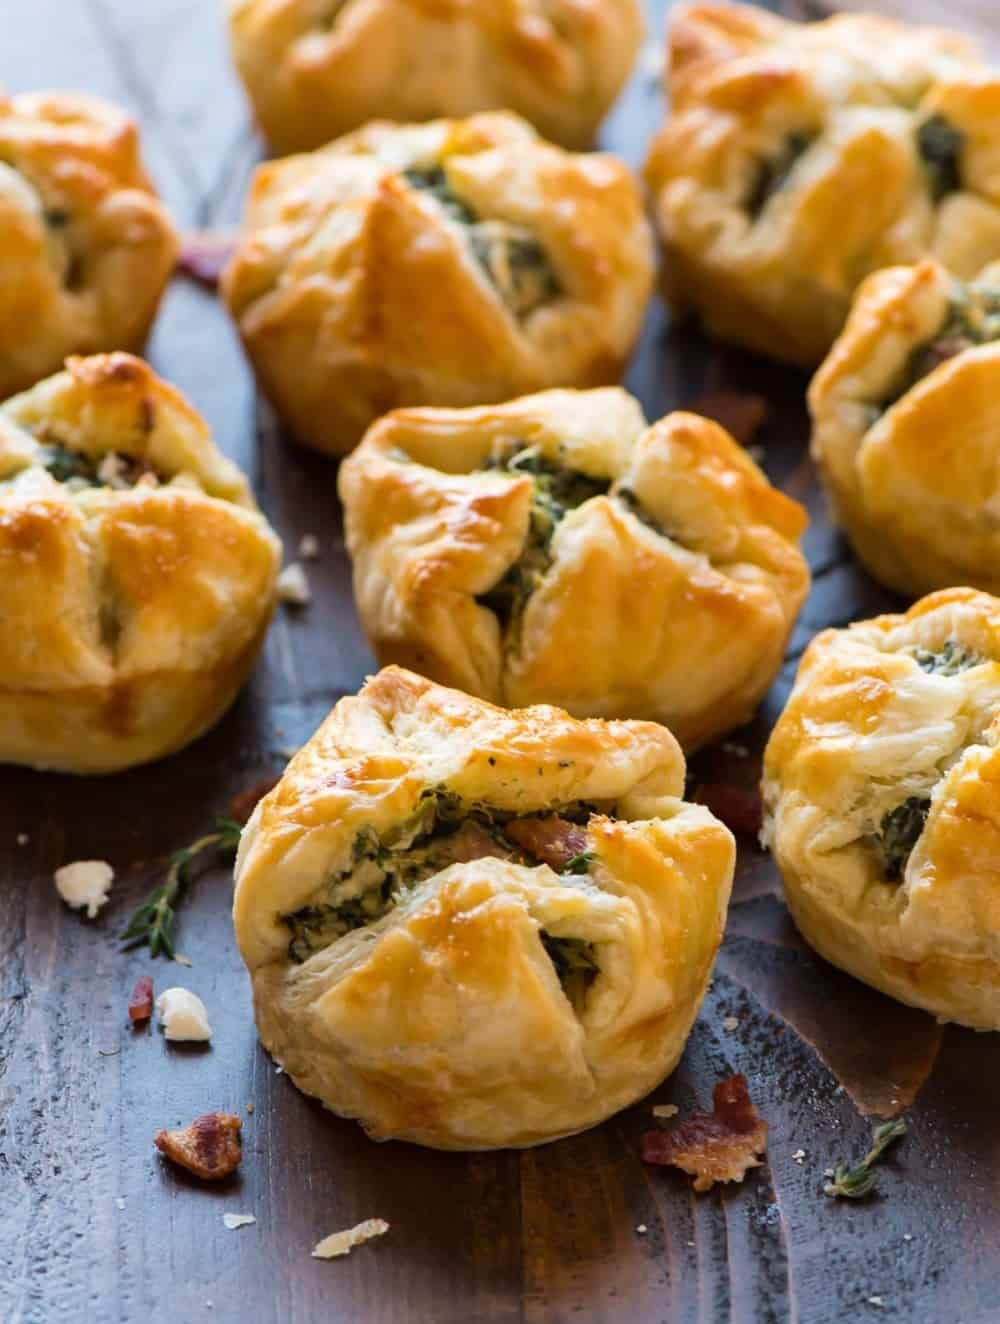 30 Best Puff Pastry Ideas Appetizers - Home, Family, Style and Art Ideas